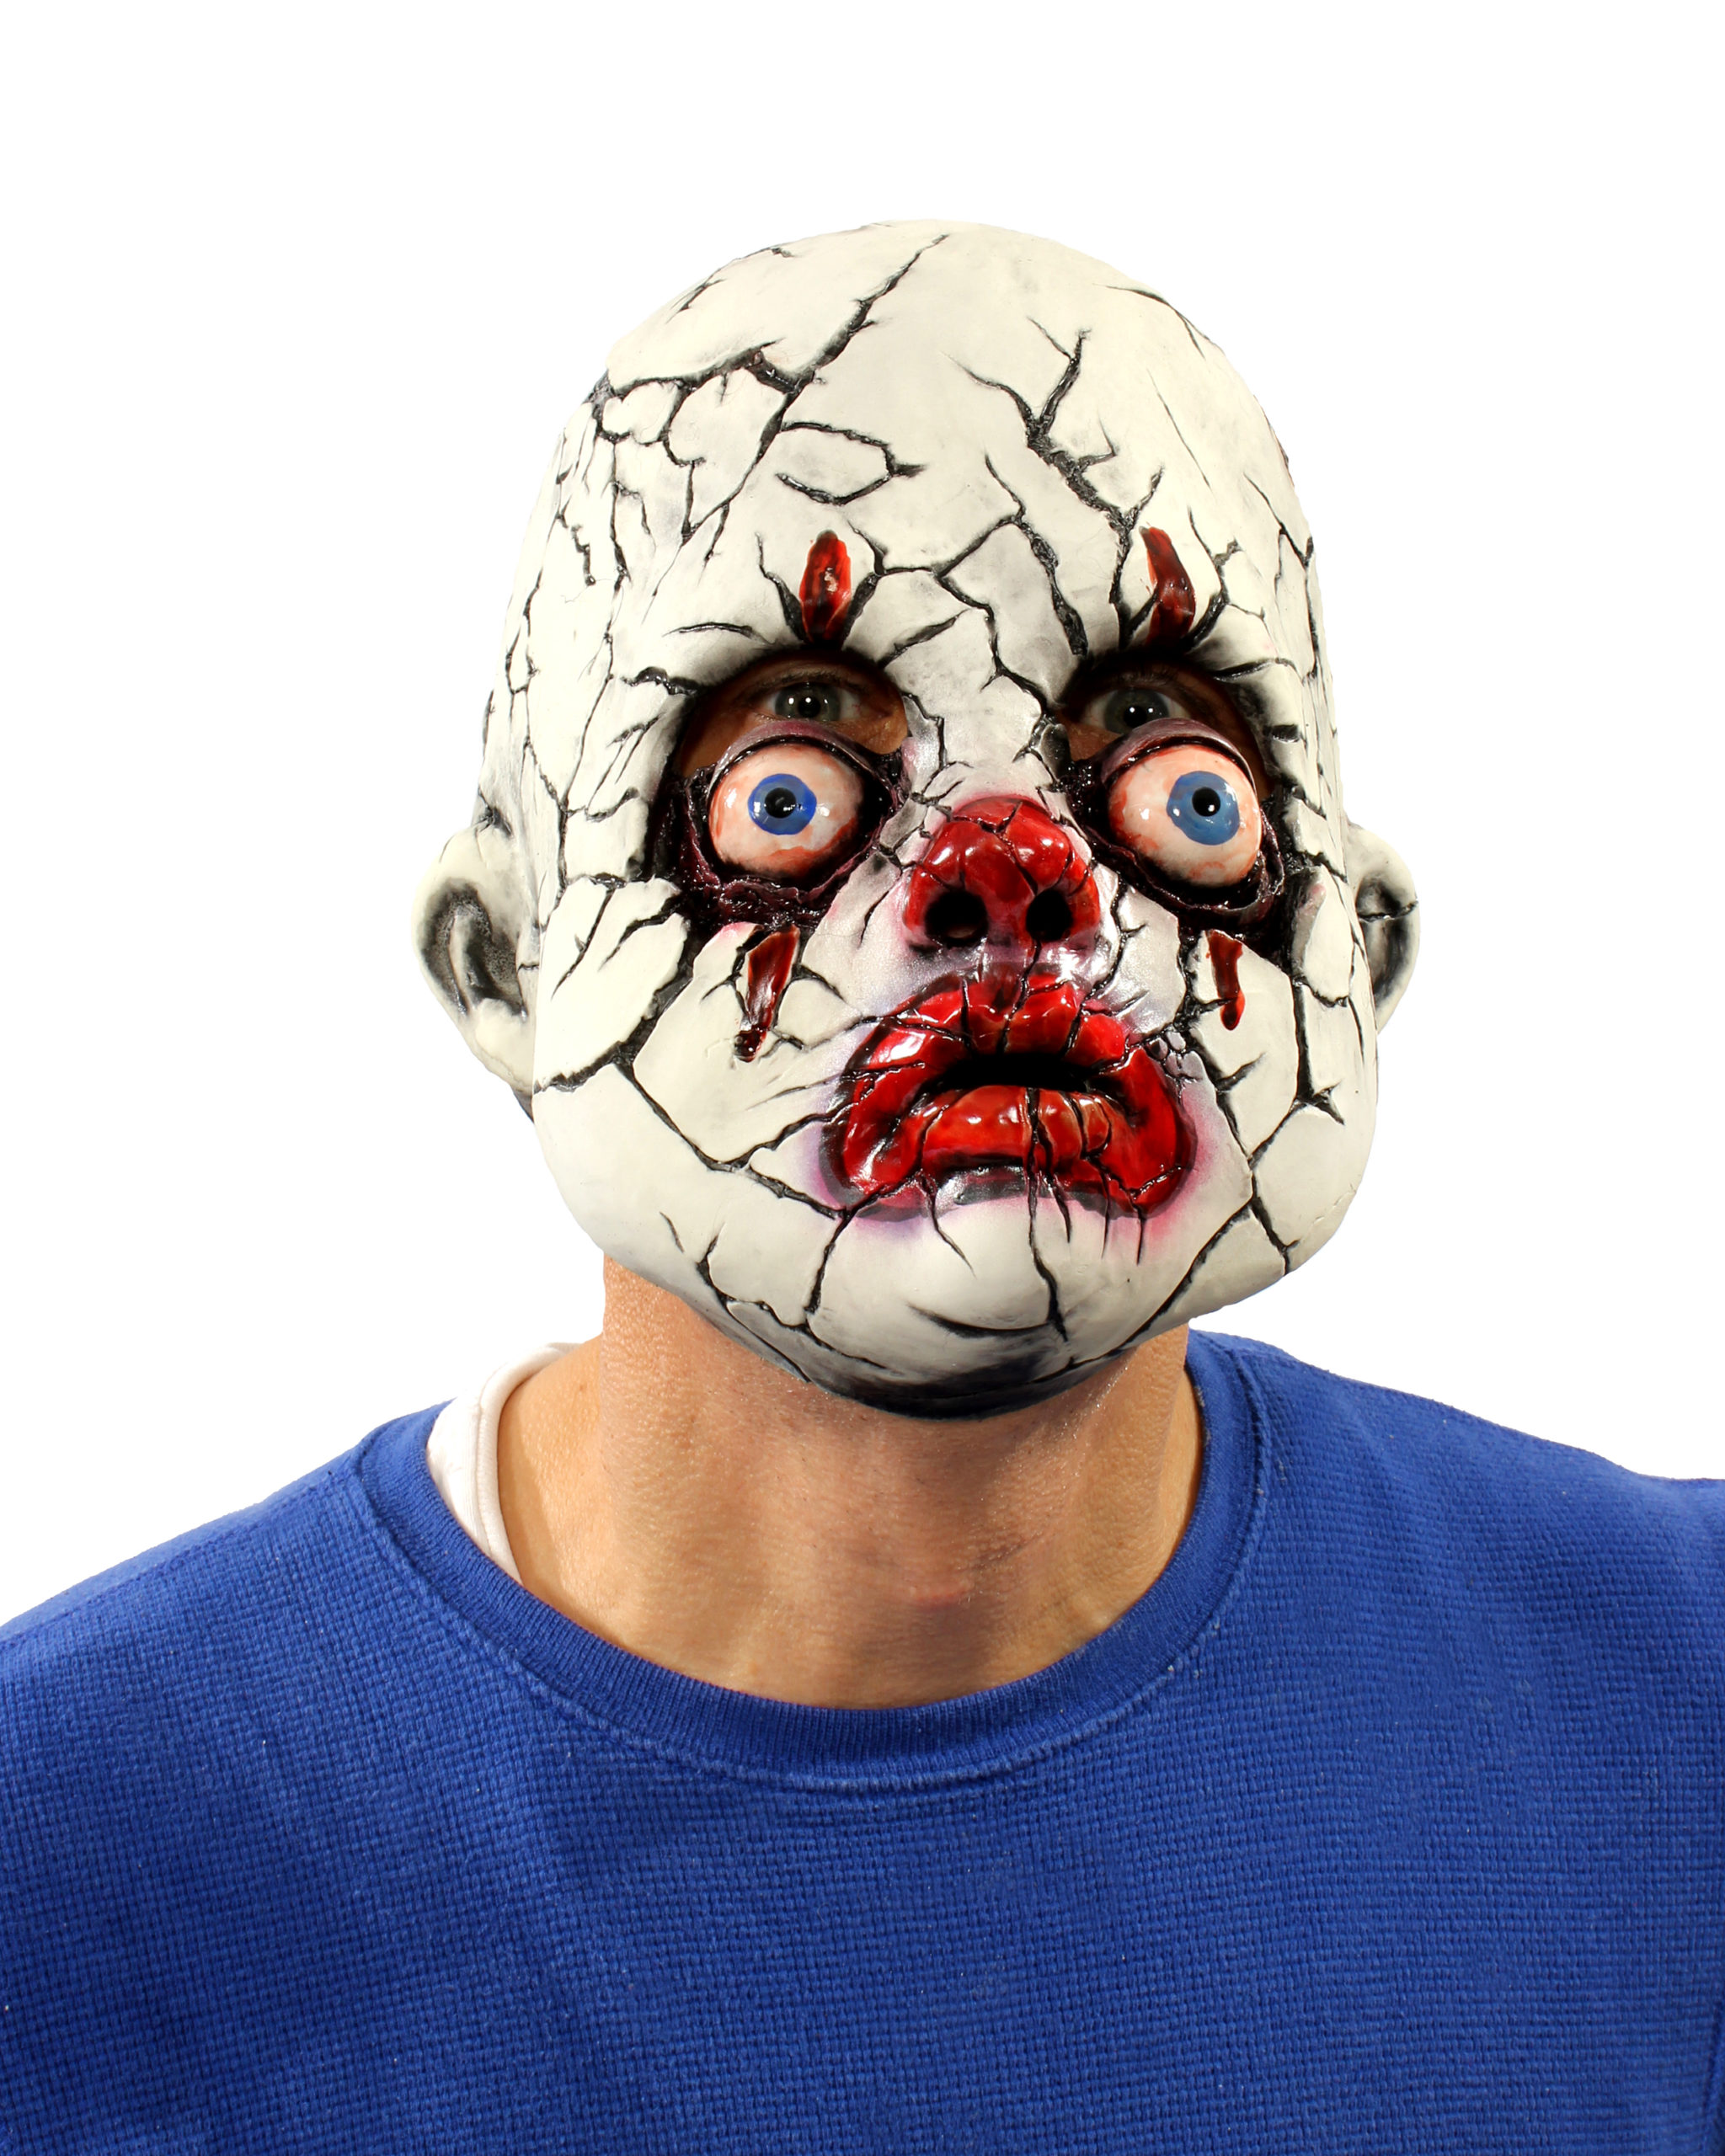 Cracked Clown Halloween Mask scaled 1